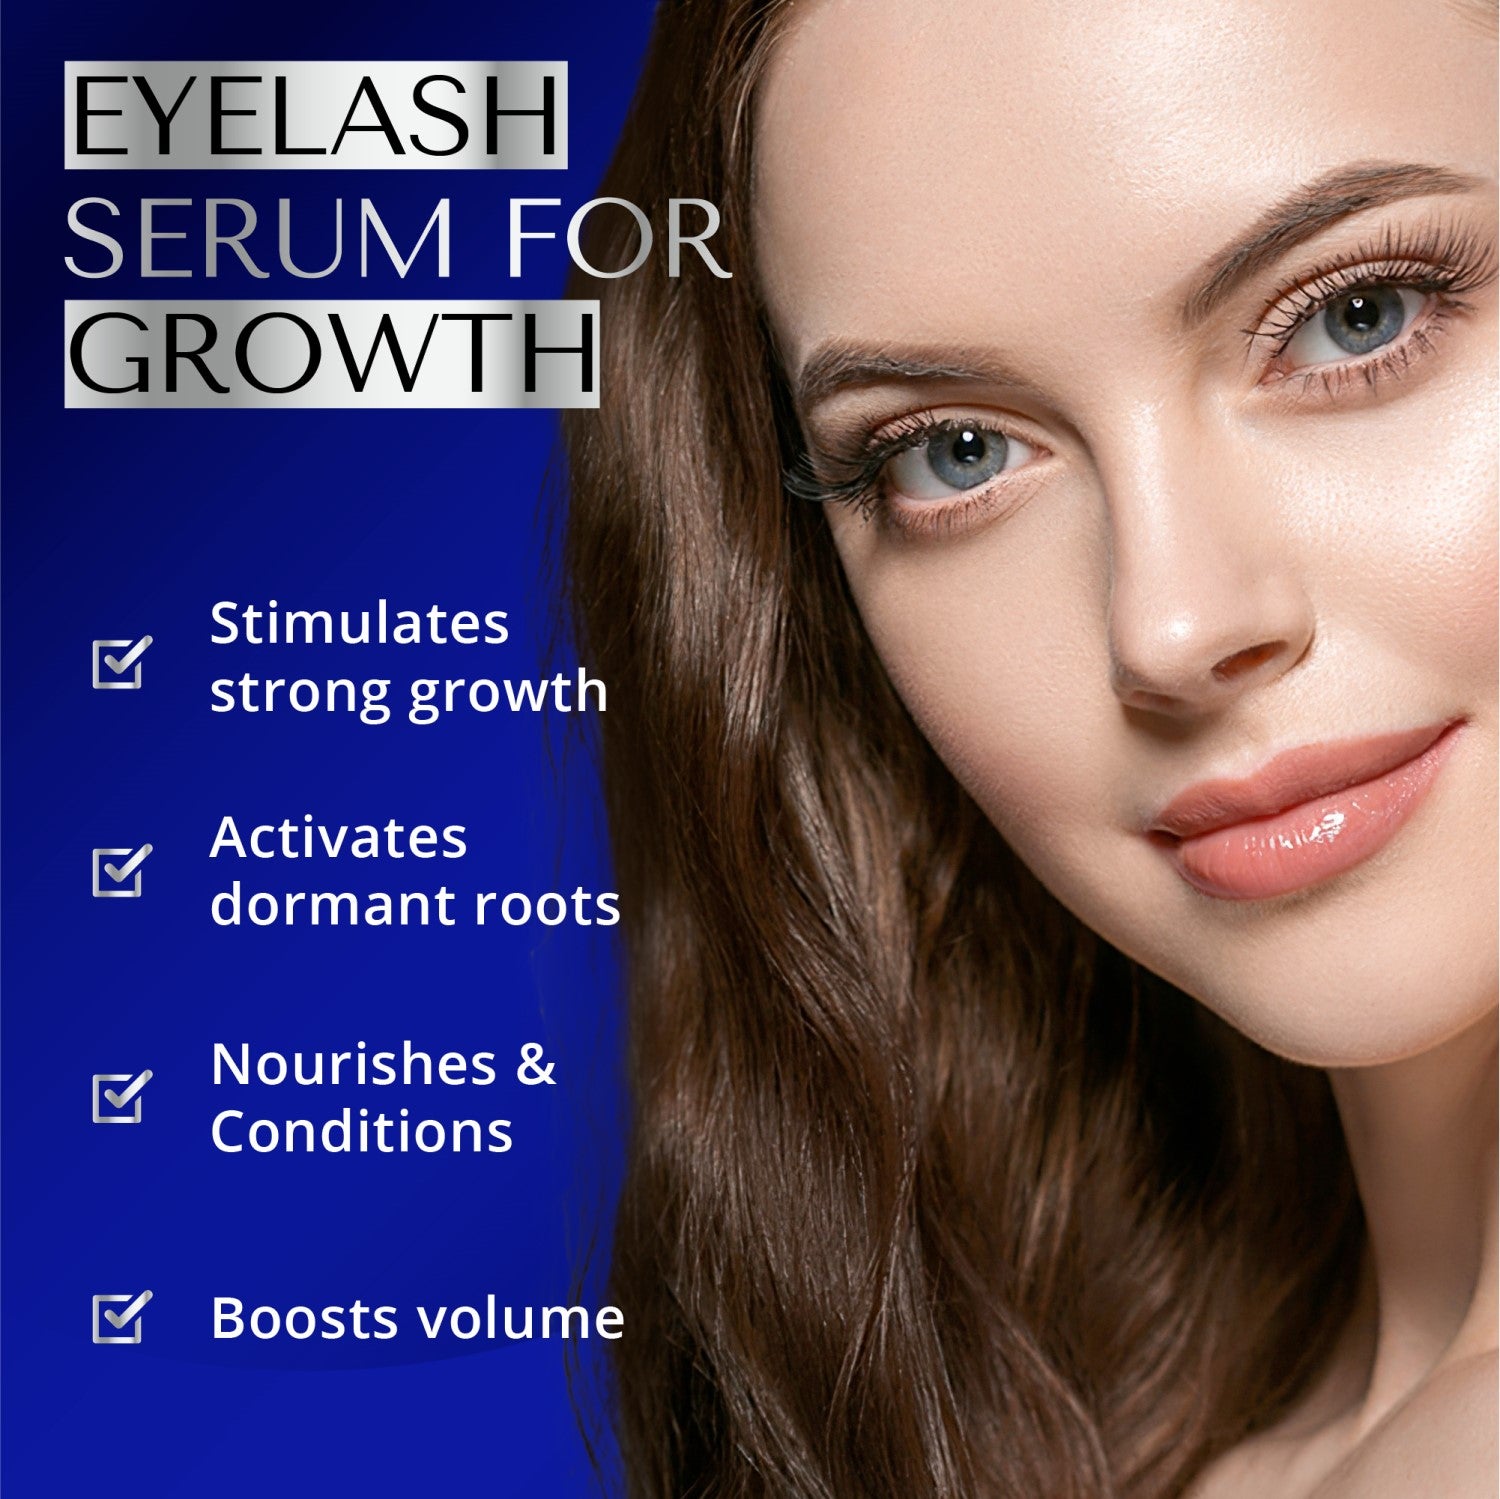 Spectaculash rapid lash growth serum stimulates strong eyelash growth, activates dormant roots, nourishes and conditions lashes and boosts lash volume.